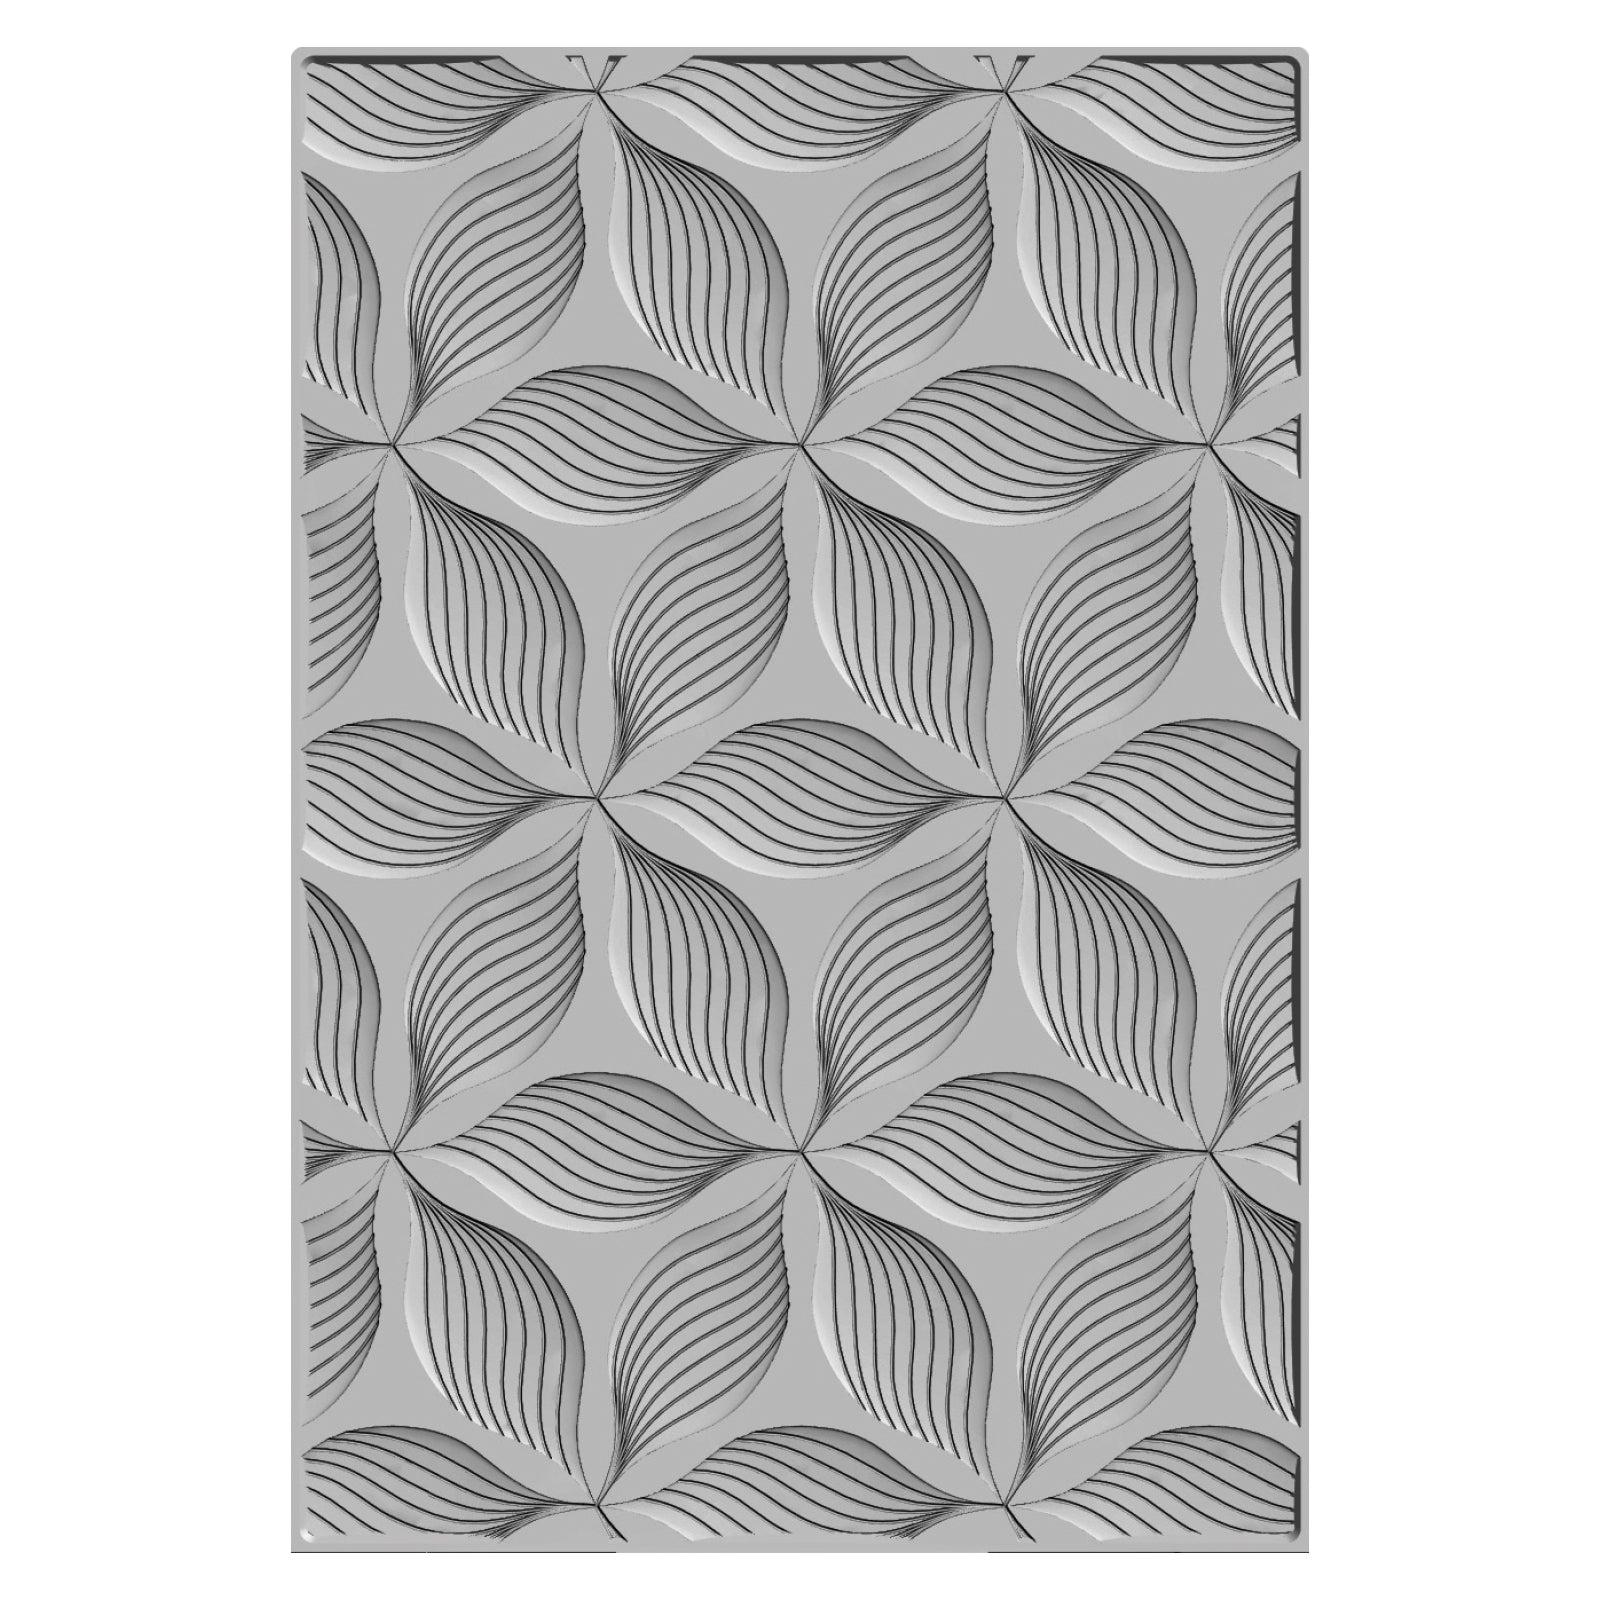 sizzix-3-d-textured-impressions-embossing-folder-defined-petals-by-sizzix